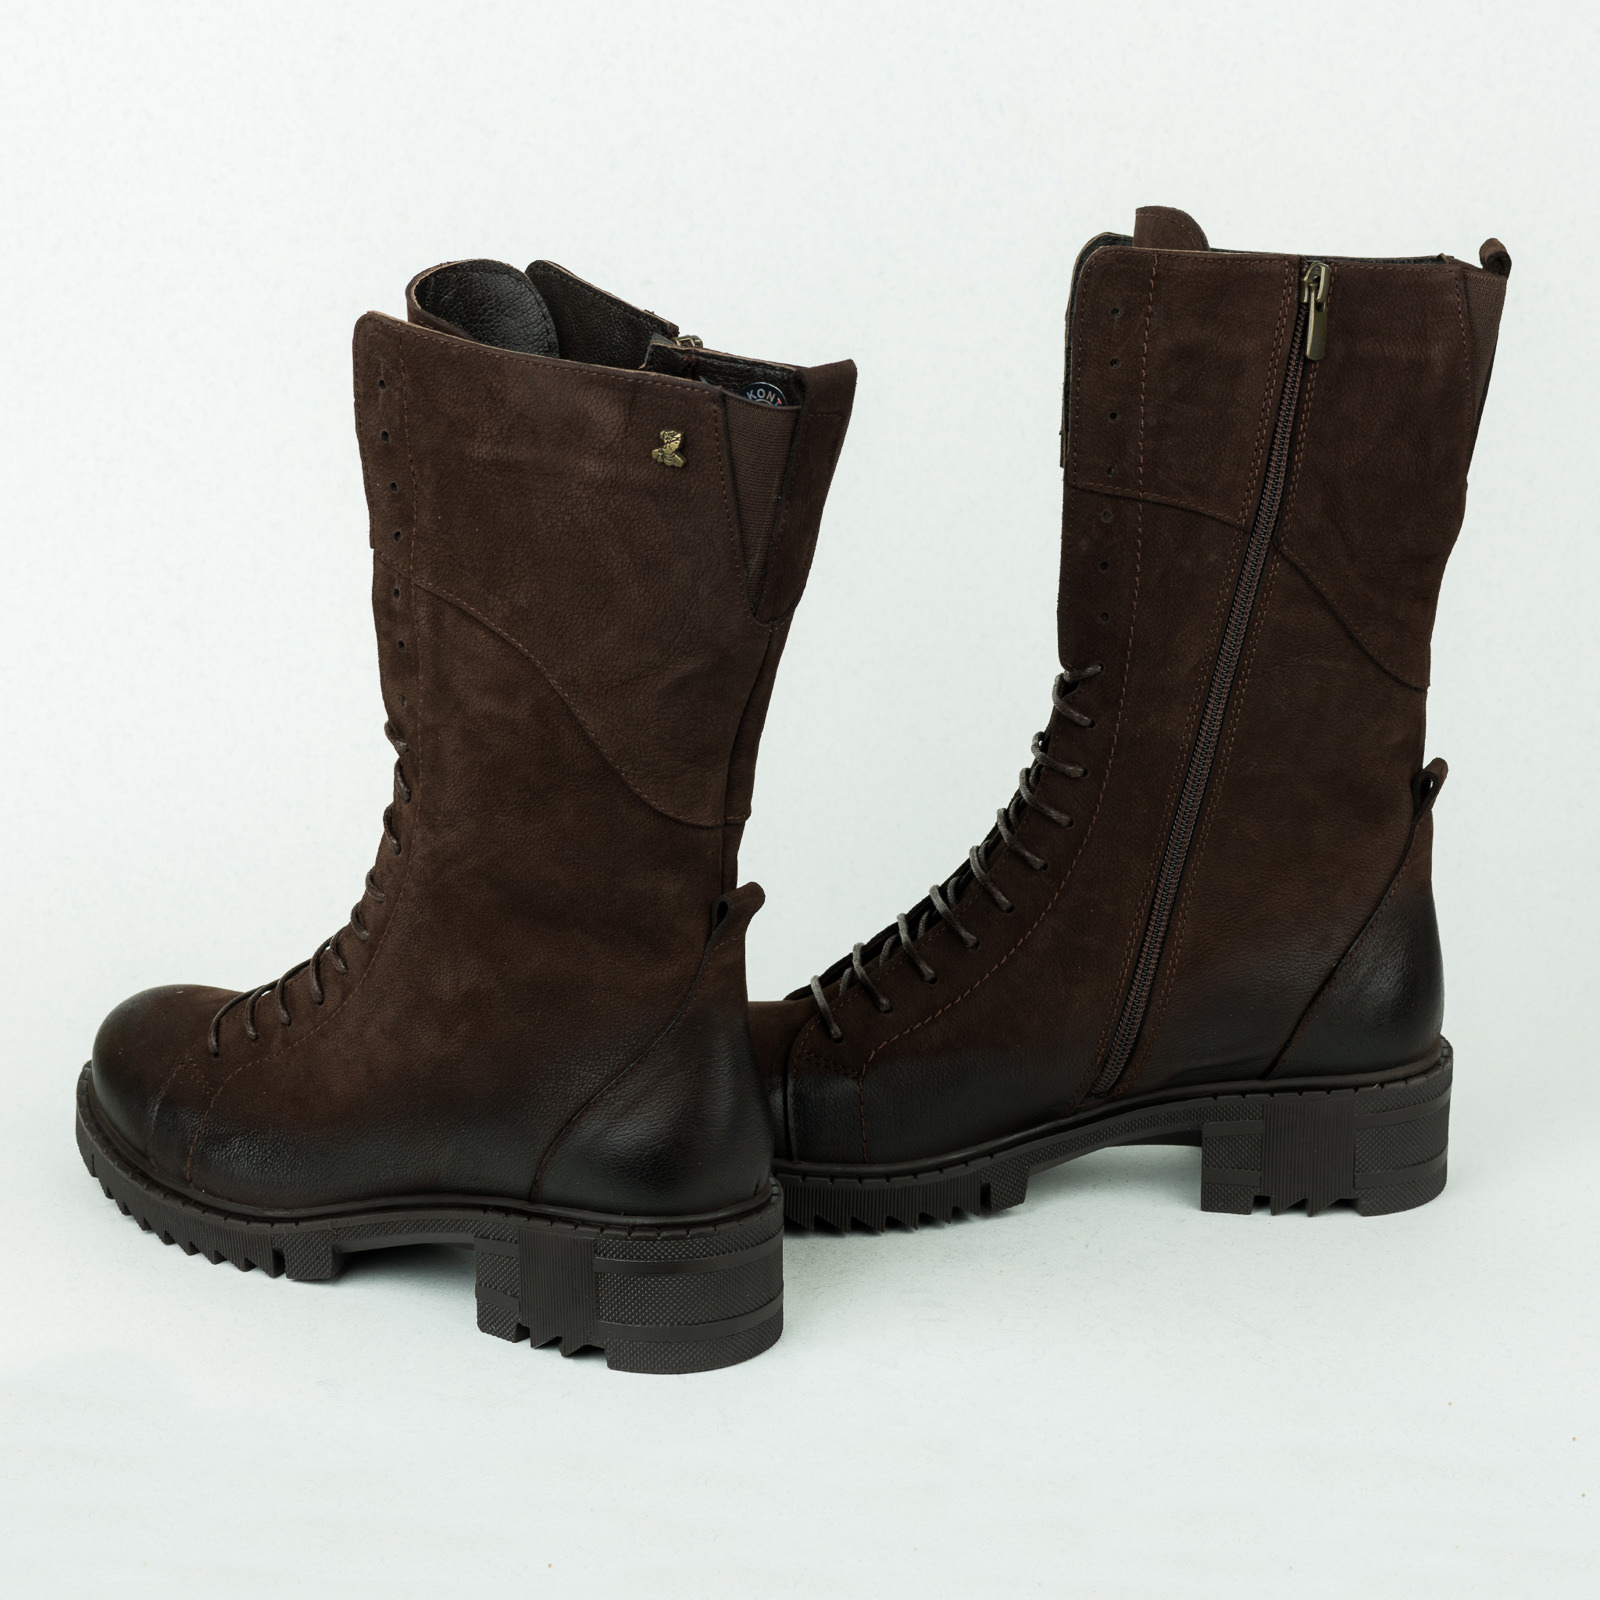 Leather ankle boots B314 - DARK BROWN